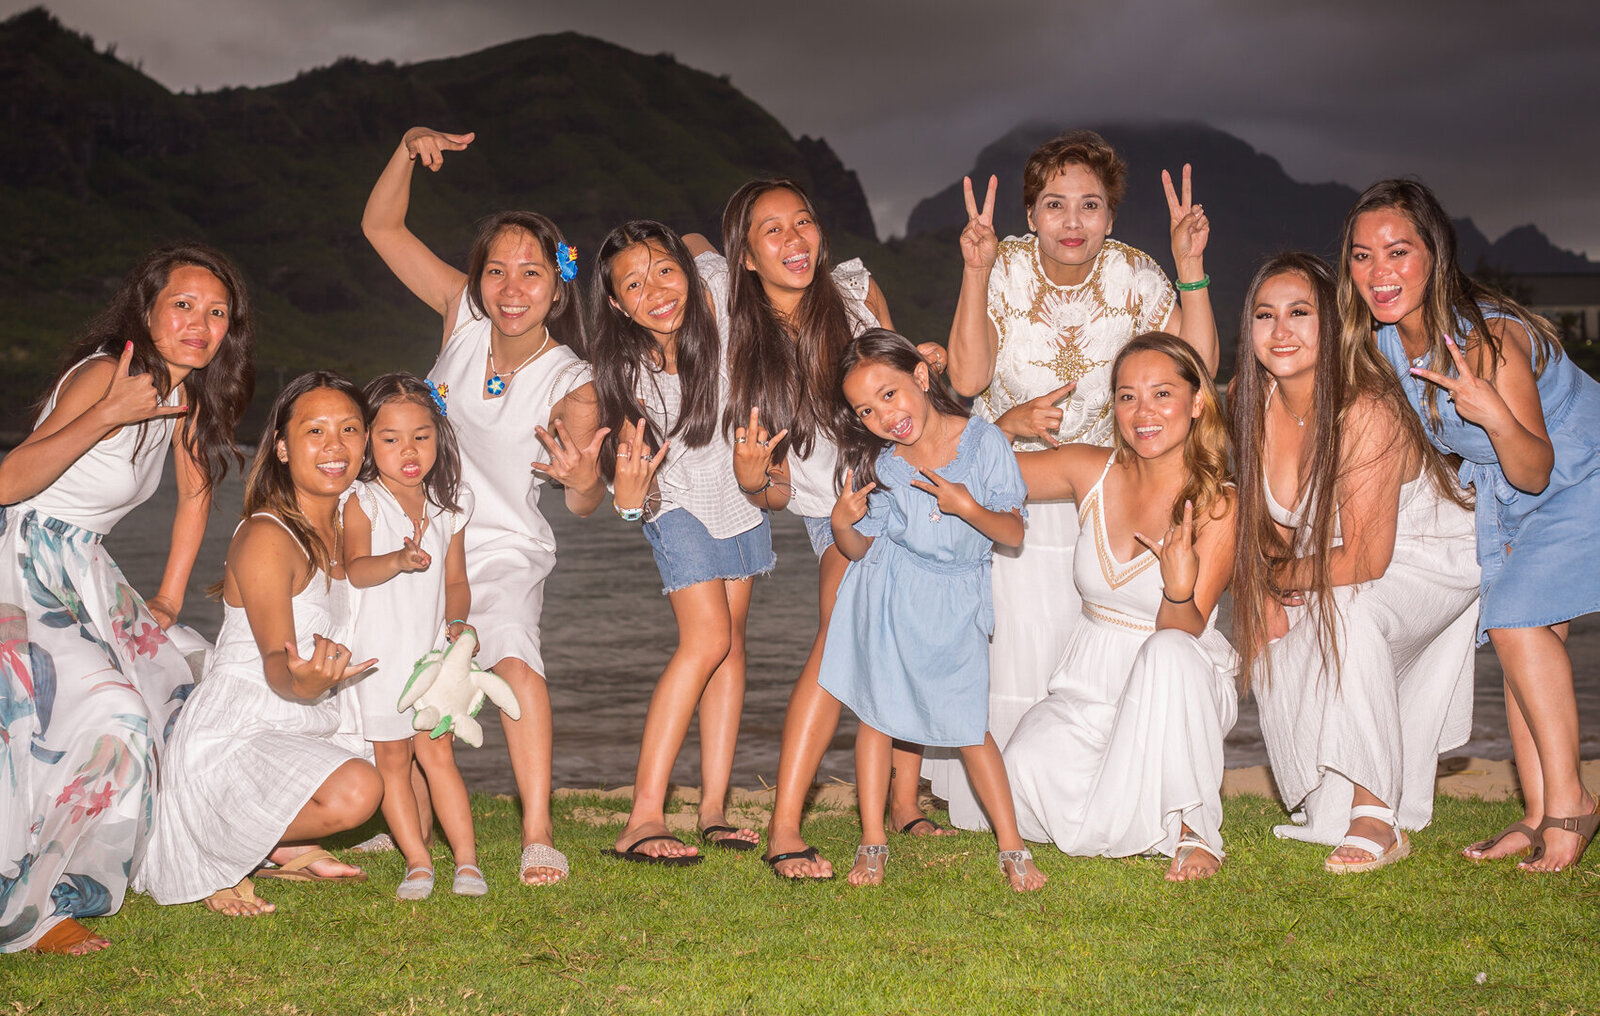 Affordable portrait photography in Oahu